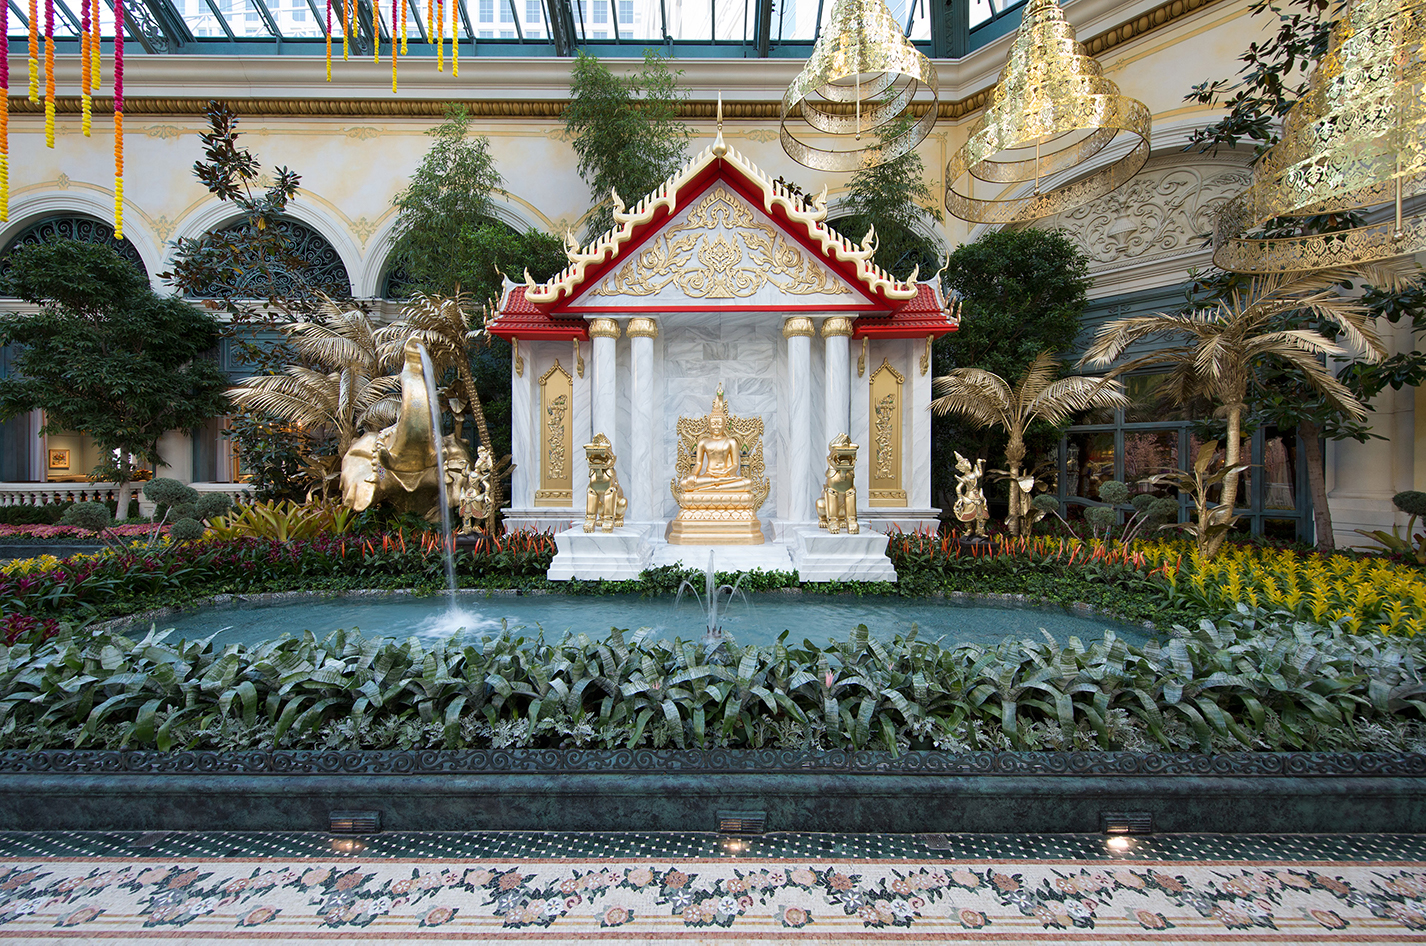 First look: Check out Bellagio's Lunar New Year display